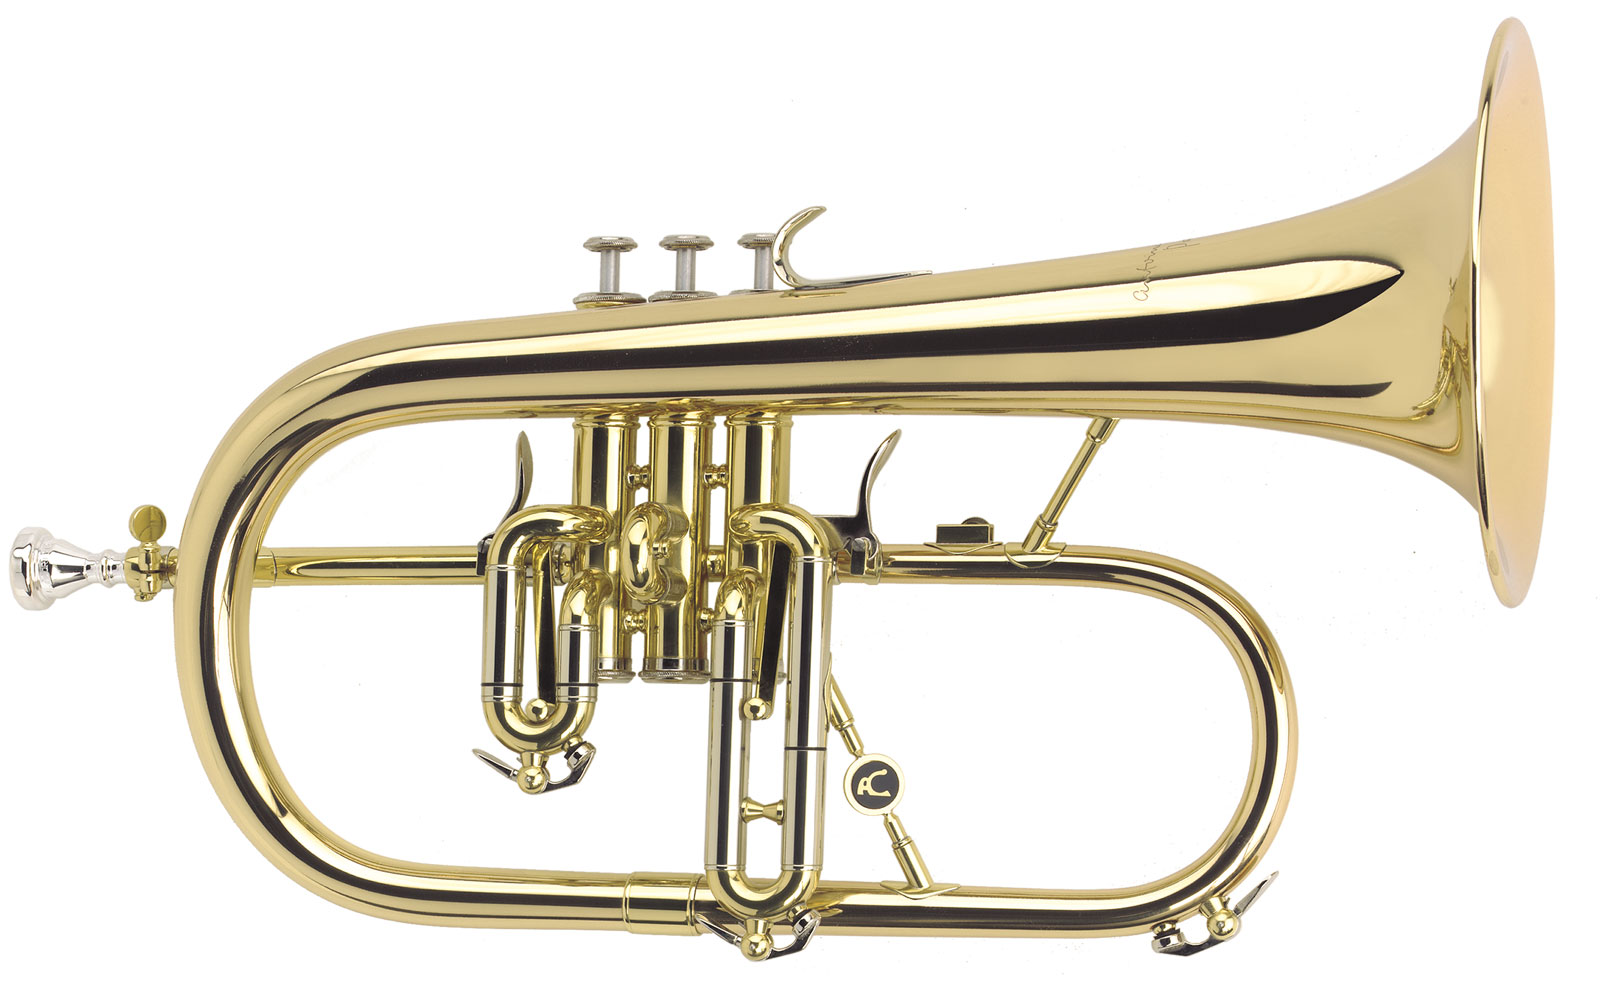 COURTOIS AC155R-1-0 - PROFESSIONAL - ROSE BRASS BELL